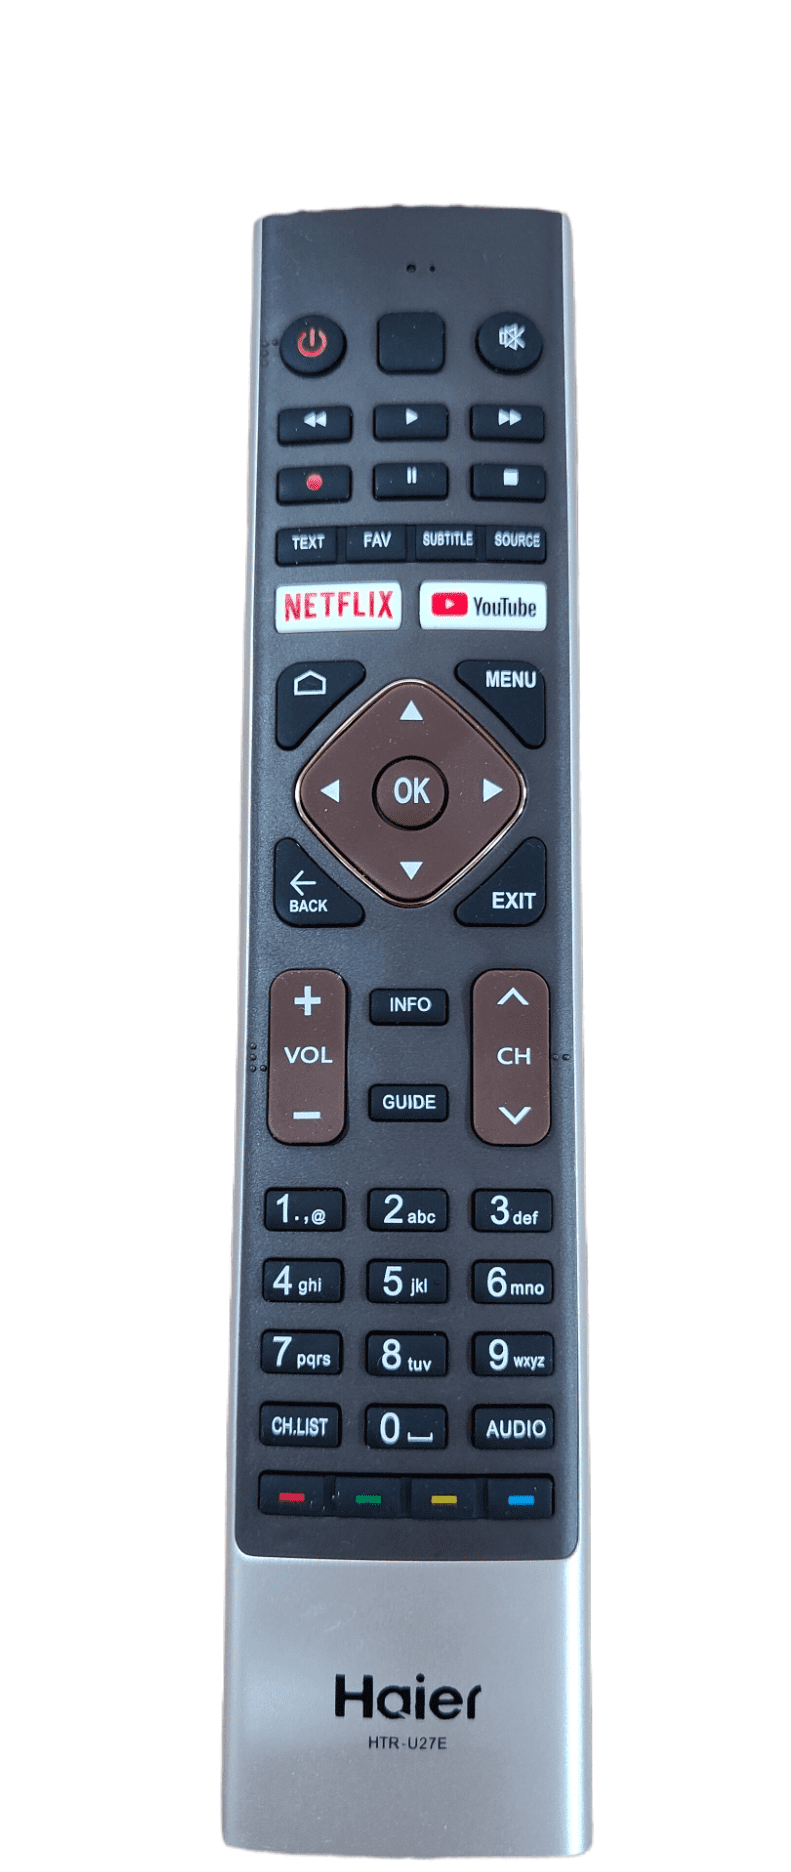 Haier Smart TV remote control Youtube,Netflix without voice recognition - Faritha